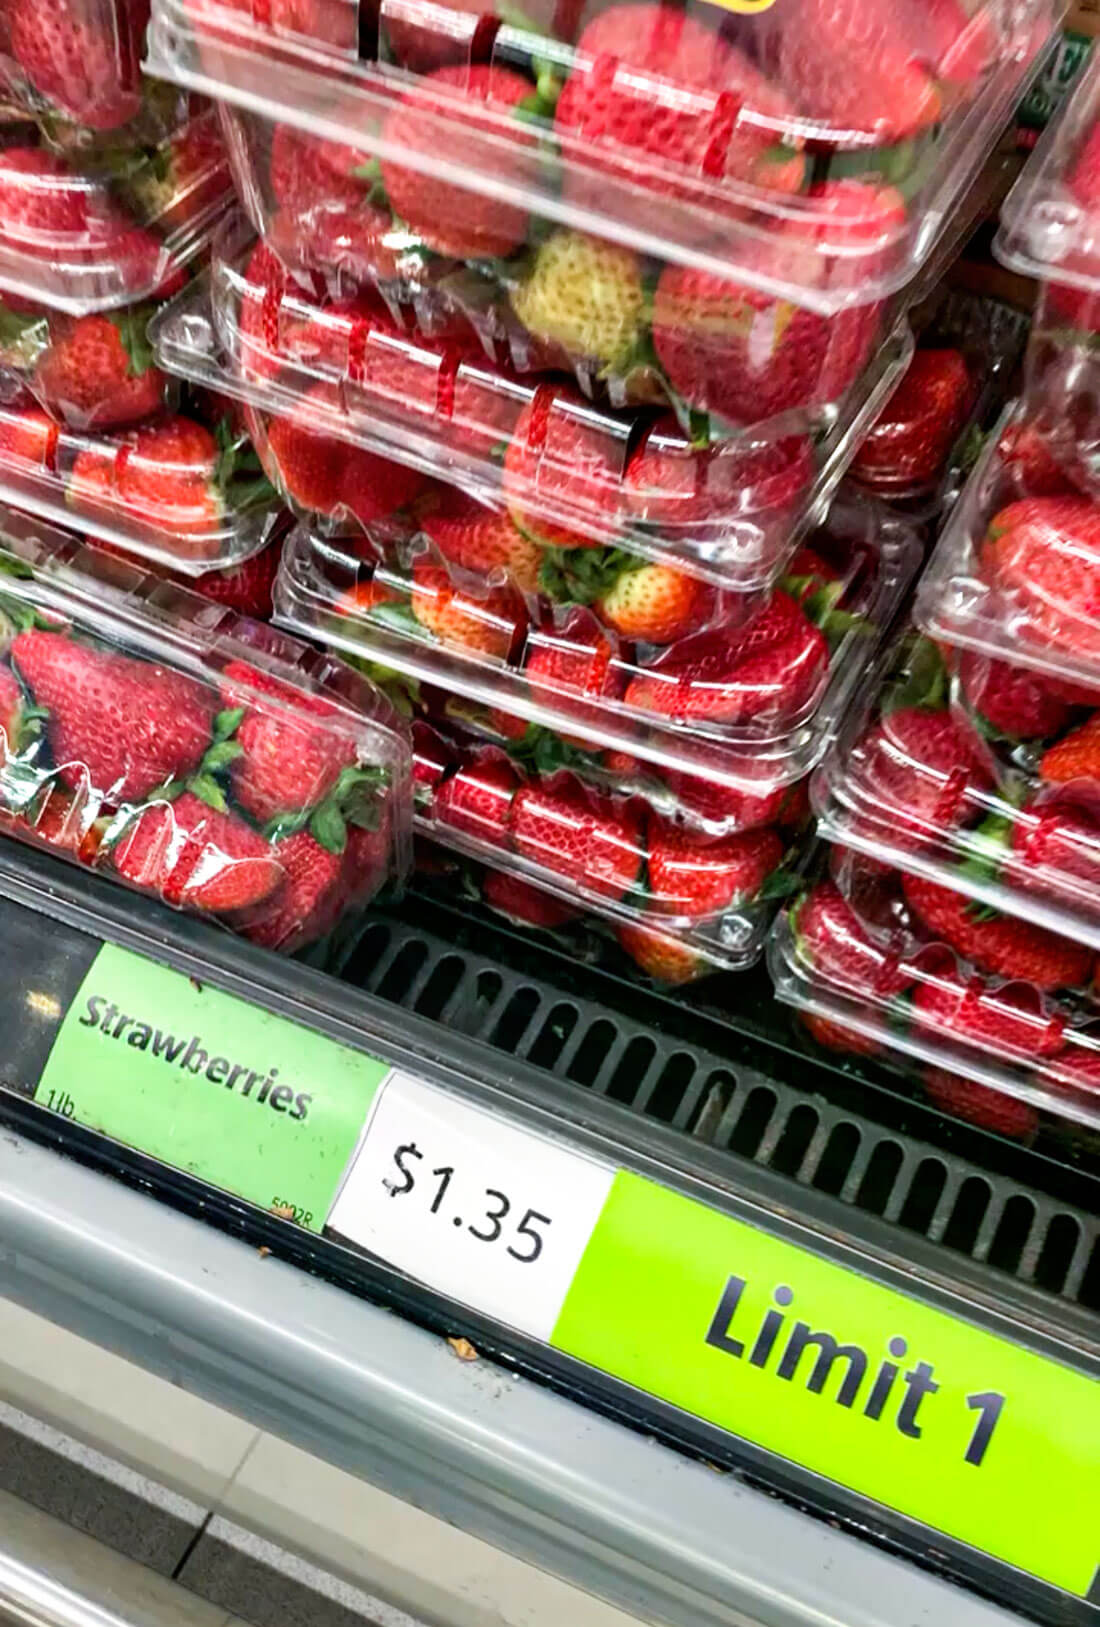 Aldi produce - strawberries at a deal - best Aldi products